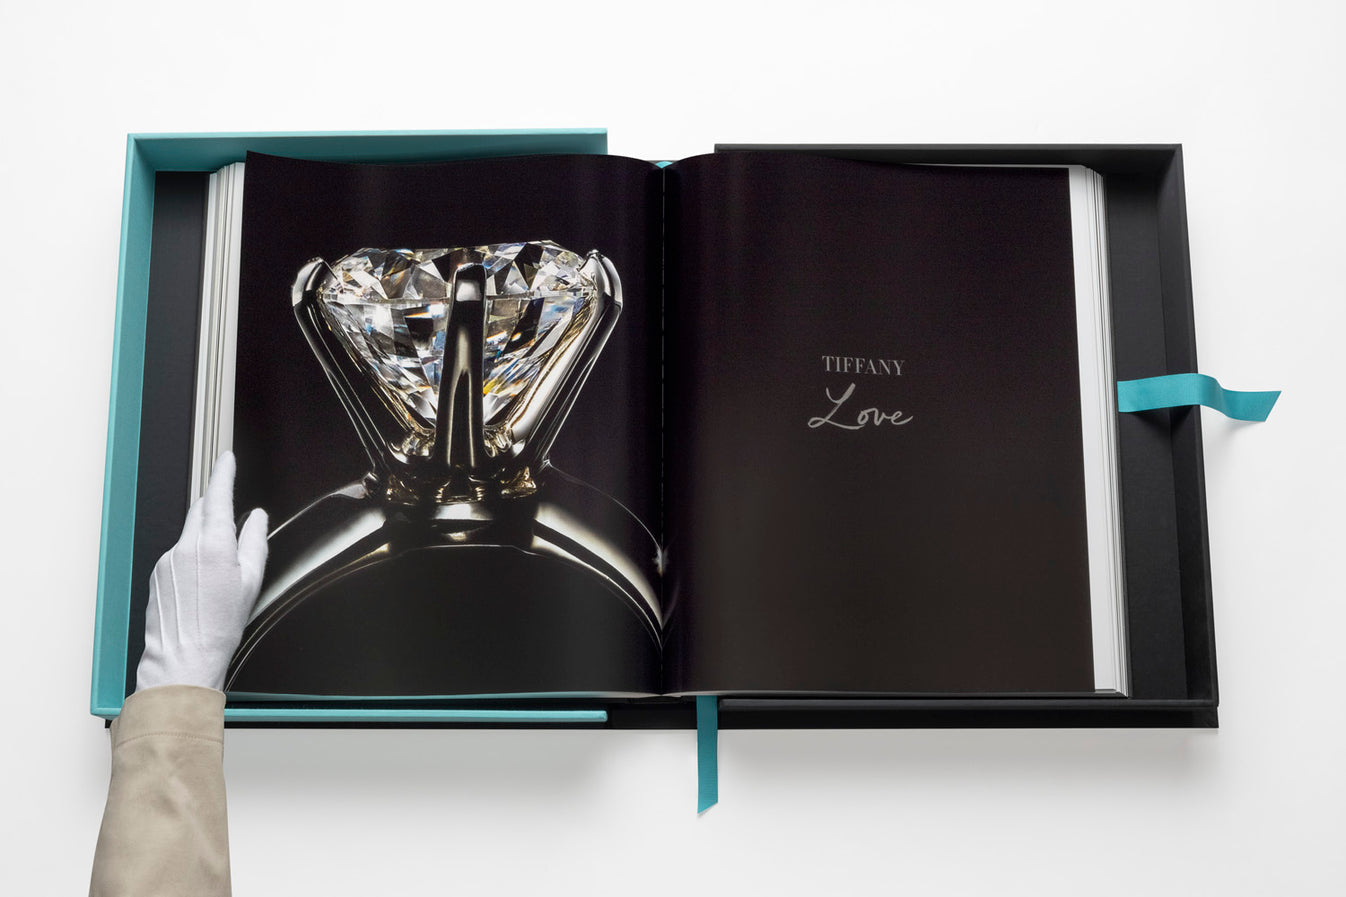 TIFFANY & CO. VISION AND VIRTUOSITY (ULTIMATE EDITION)